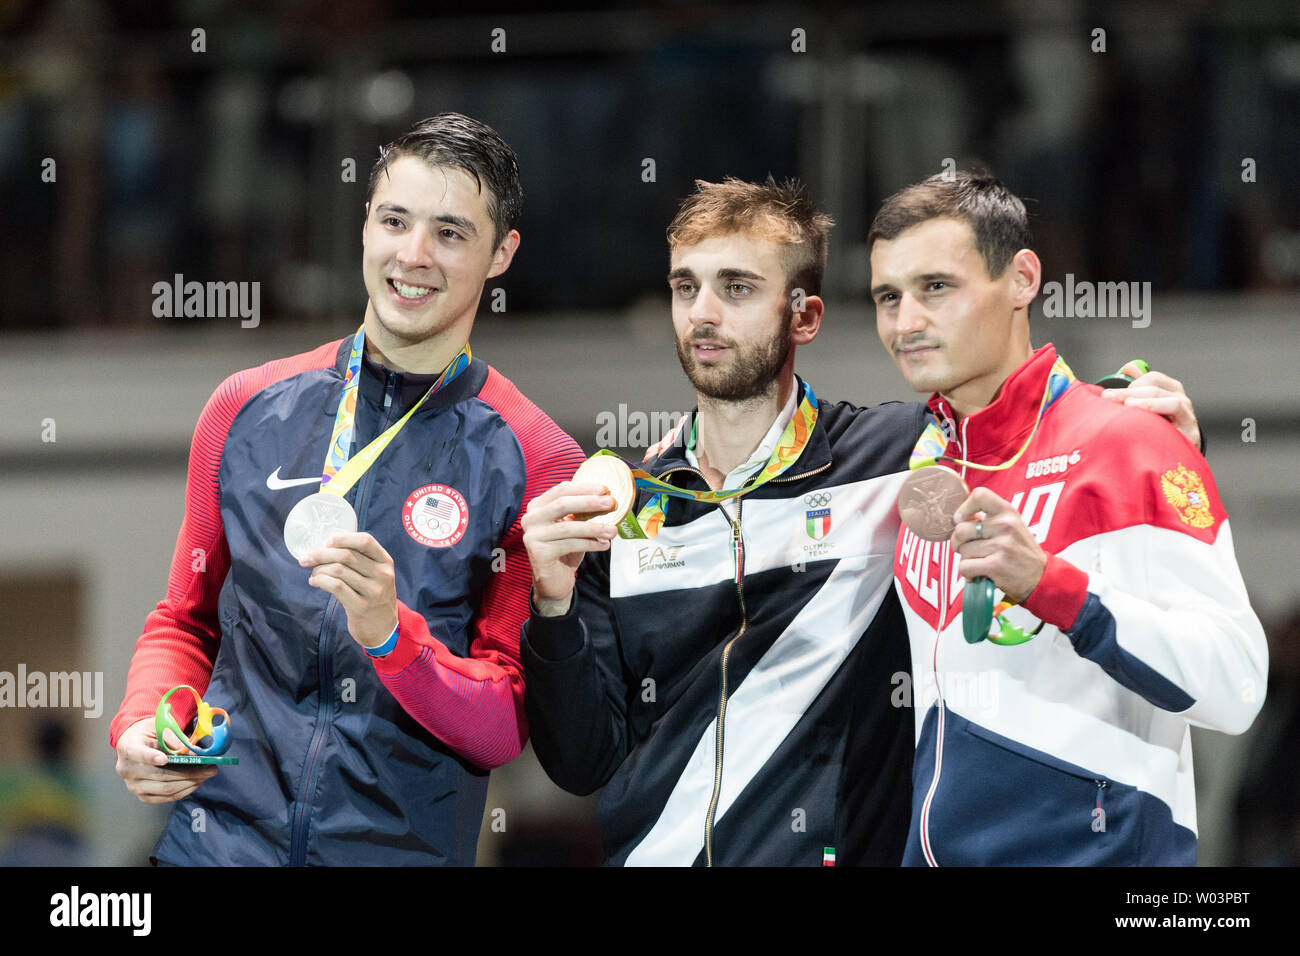 Gold Medal Winner Daniele Garozzo Center Of Italy Stands With Silver Medalist Alexander Massialas Of The United States Left And Bronze Medalist Timur Safin Of The Russian Federation During The Medal Ceremony